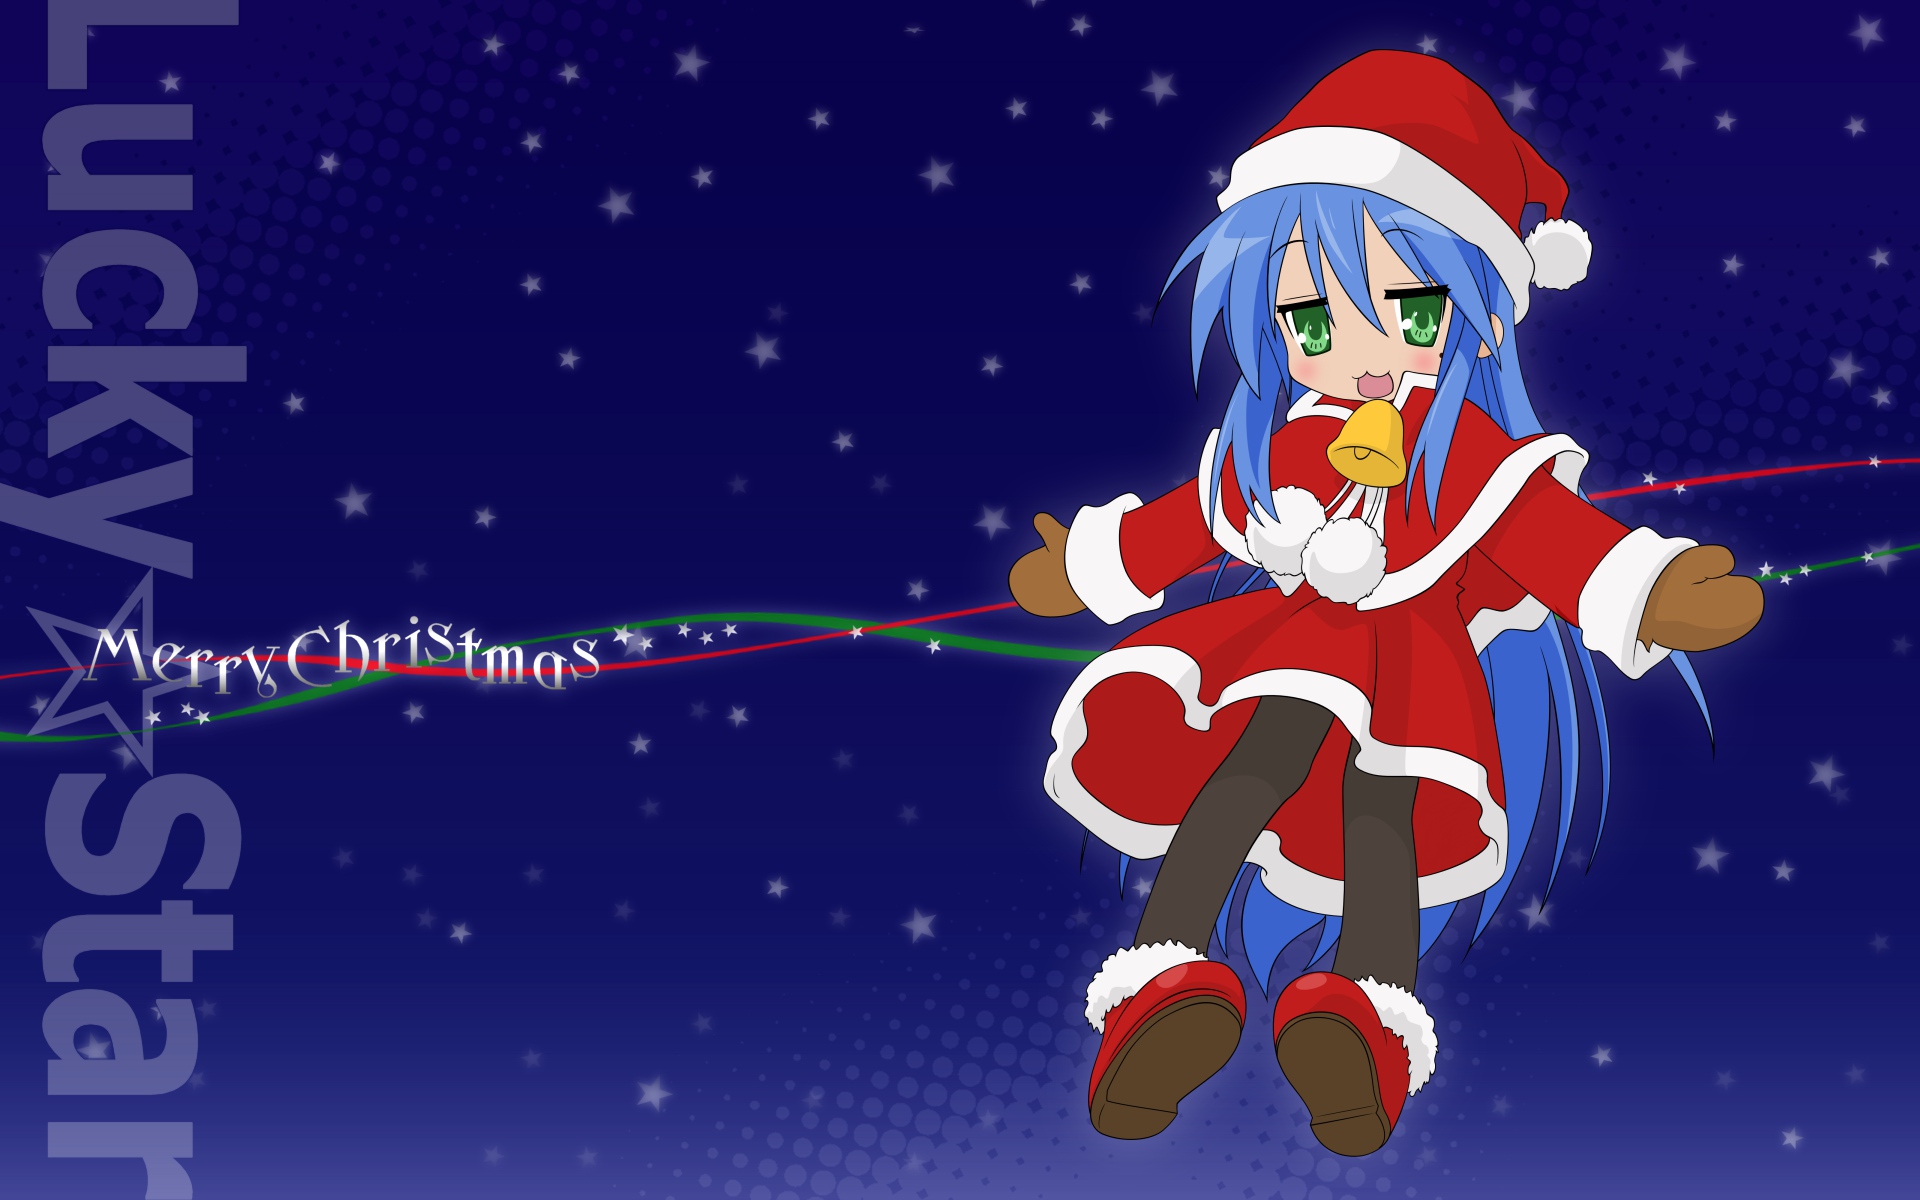 Konata Izumi from Lucky Star wearing a Santa hat, celebrating Christmas with an anime style.